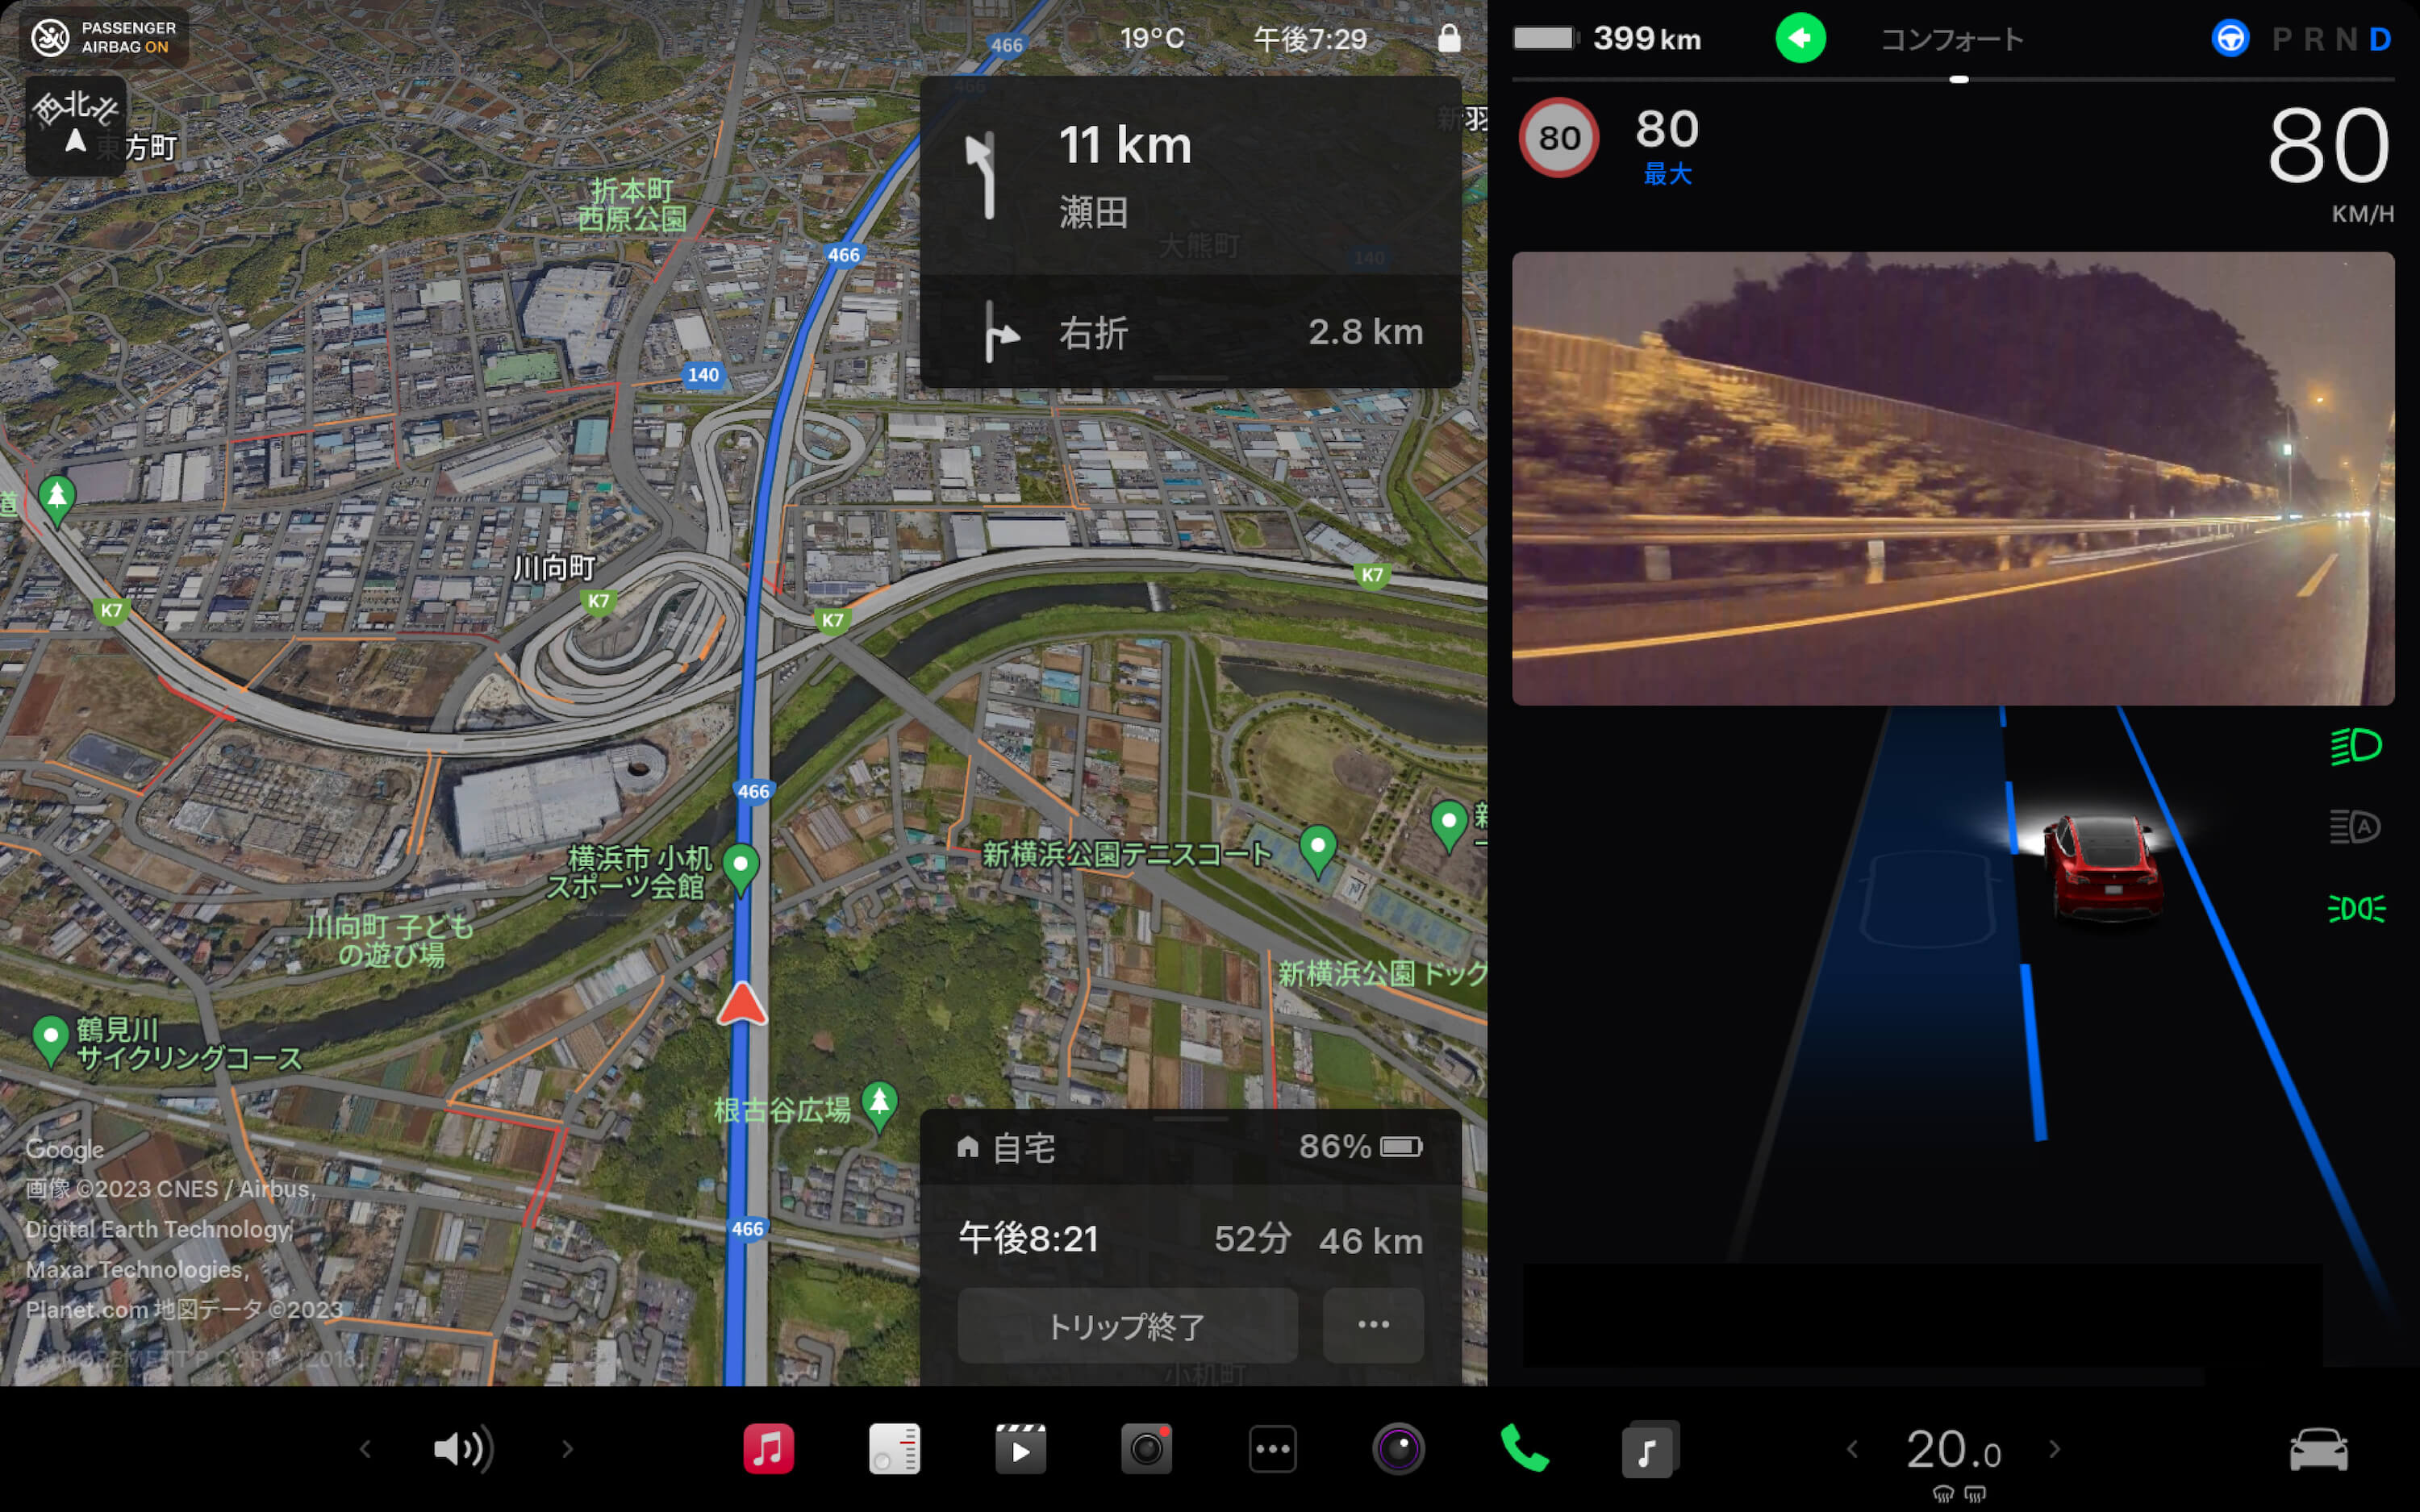 In-car touchscreen showing a navigation map and street view